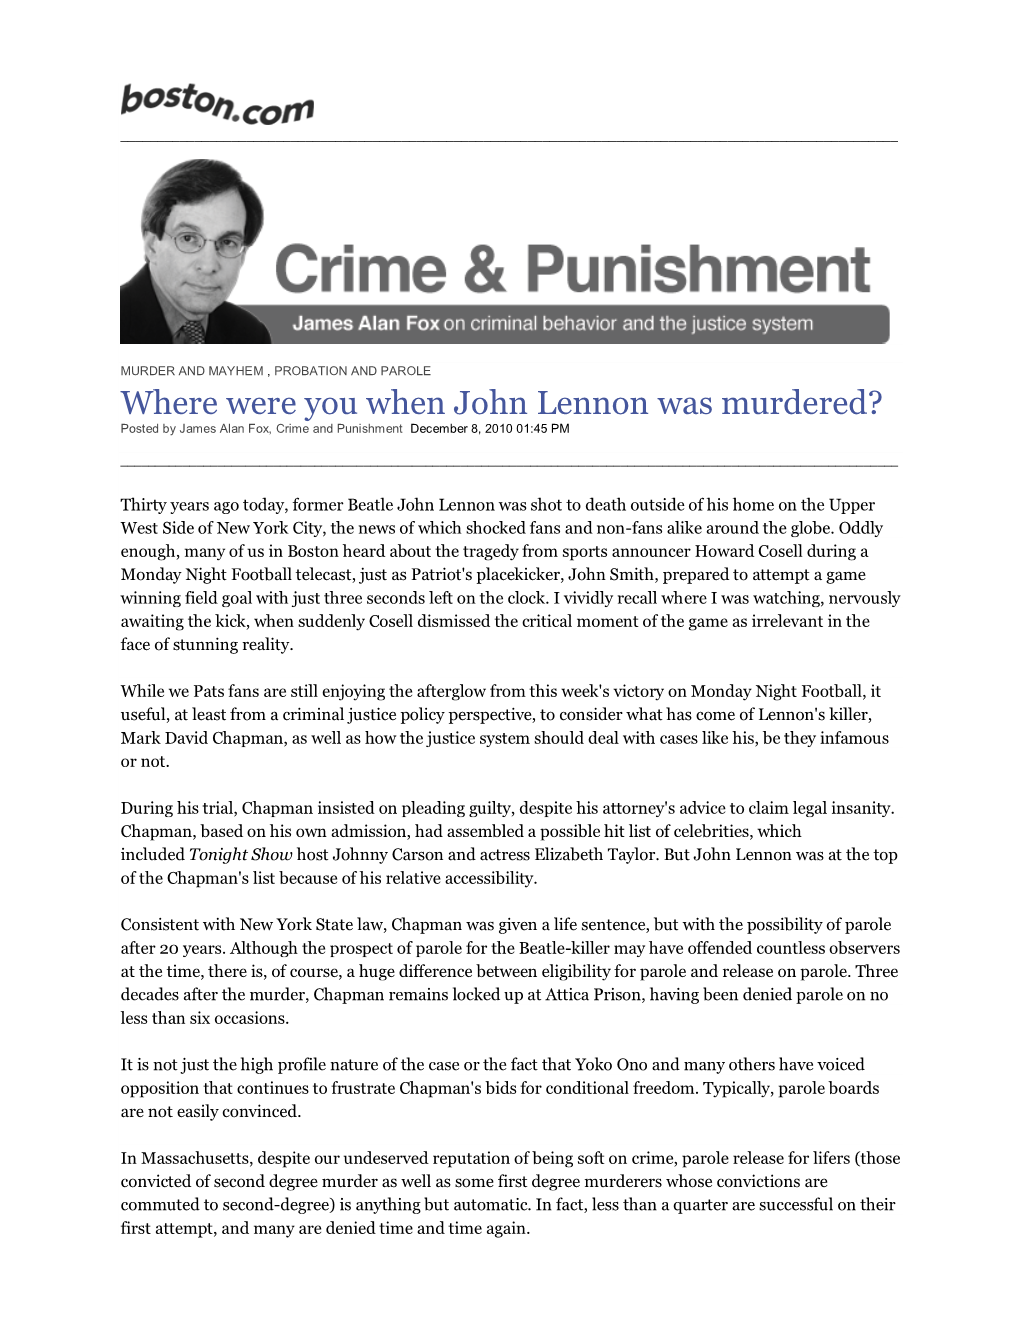 Where Were You When John Lennon Was Murdered? Posted by James Alan Fox, Crime and Punishment December 8, 2010 01:45 PM